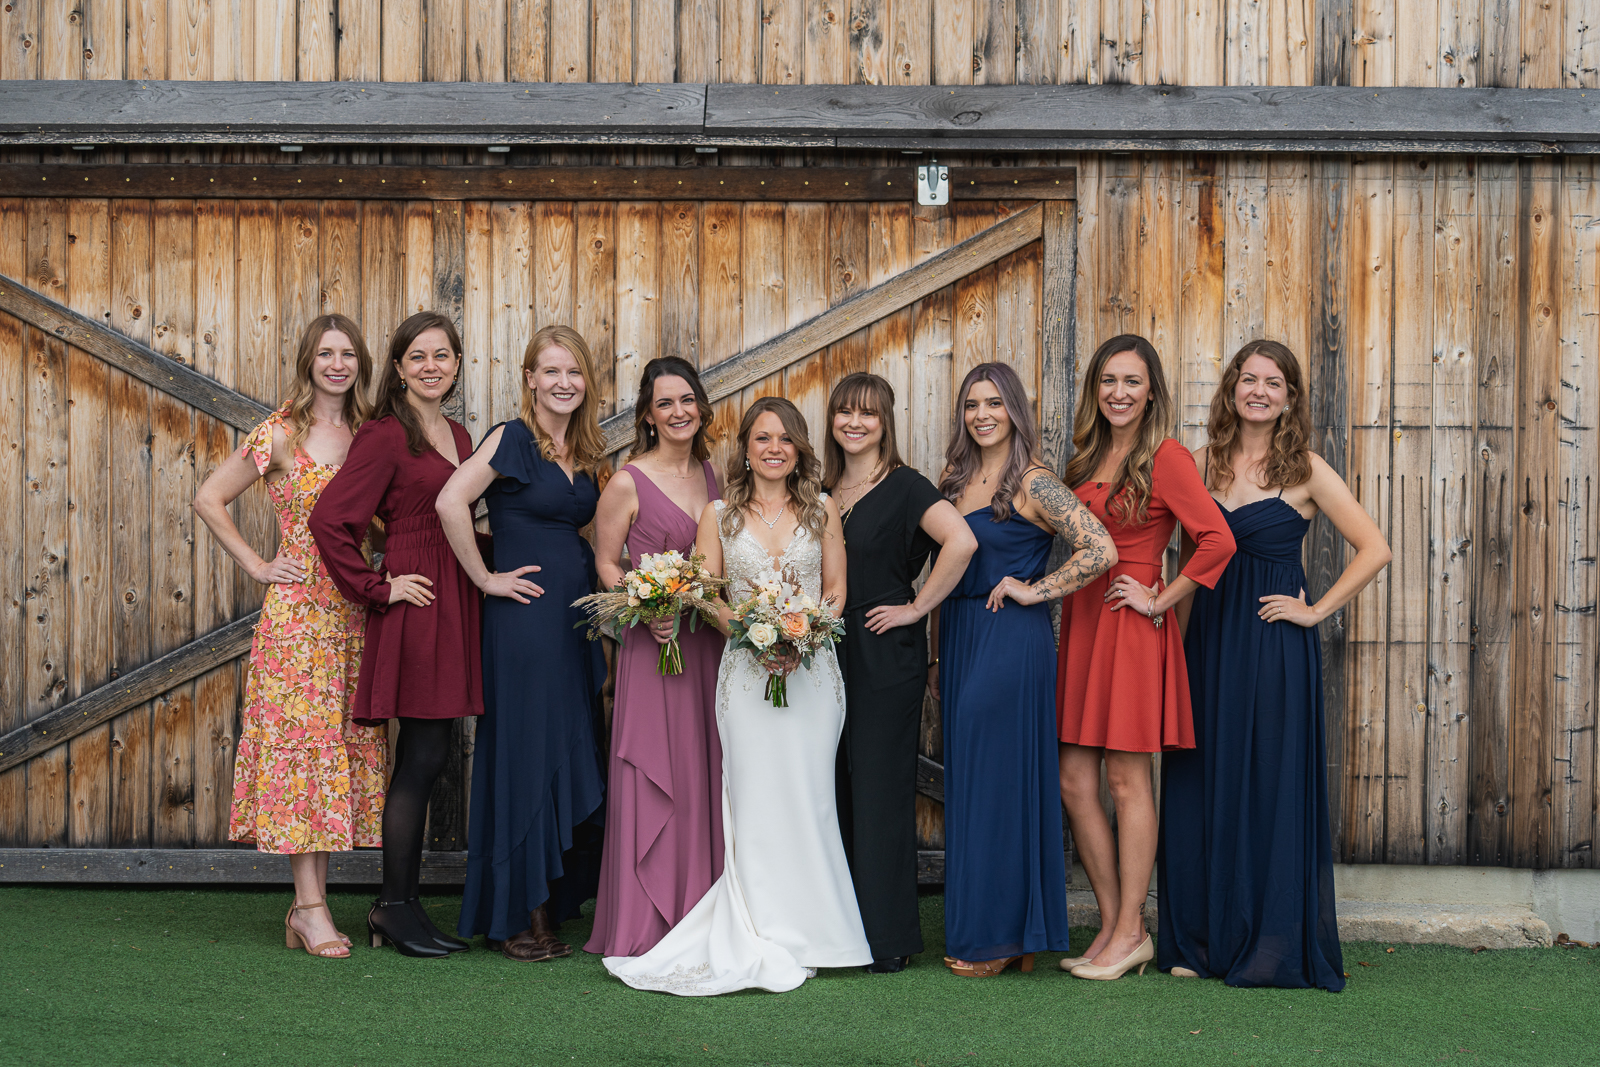 Bride with family, family portrait, wedding portrait, fall wedding, rustic outdoor wedding ceremony at White Birch Barn